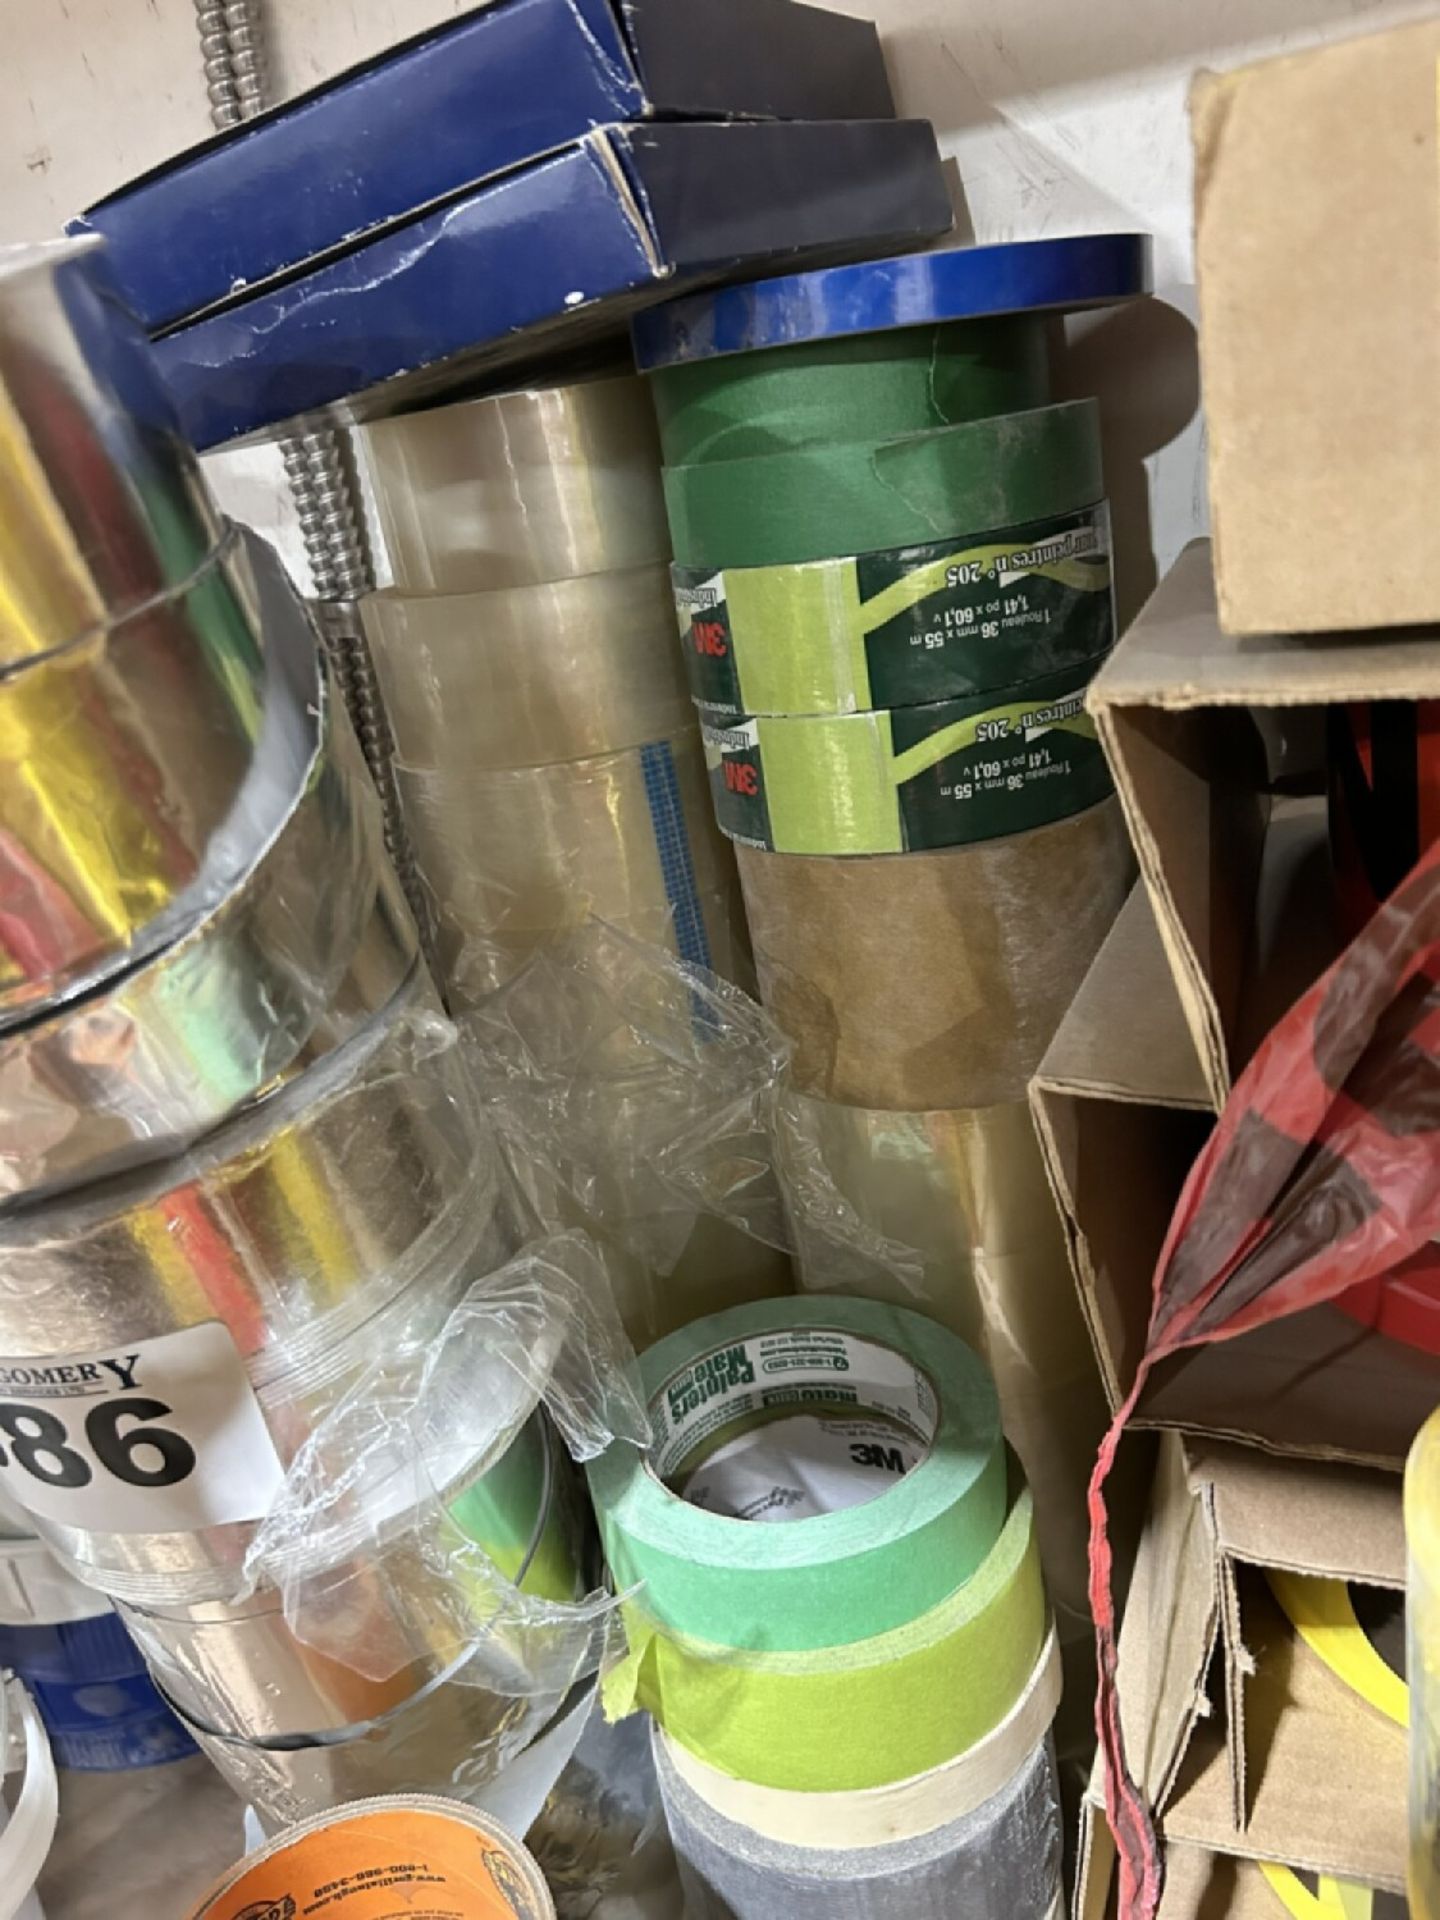 L/O ASSORTED CAUTION TAPE, MASTIC TAPE, FOIL DUCT TAPE, PACKING TAPE, ETC. - Image 4 of 5